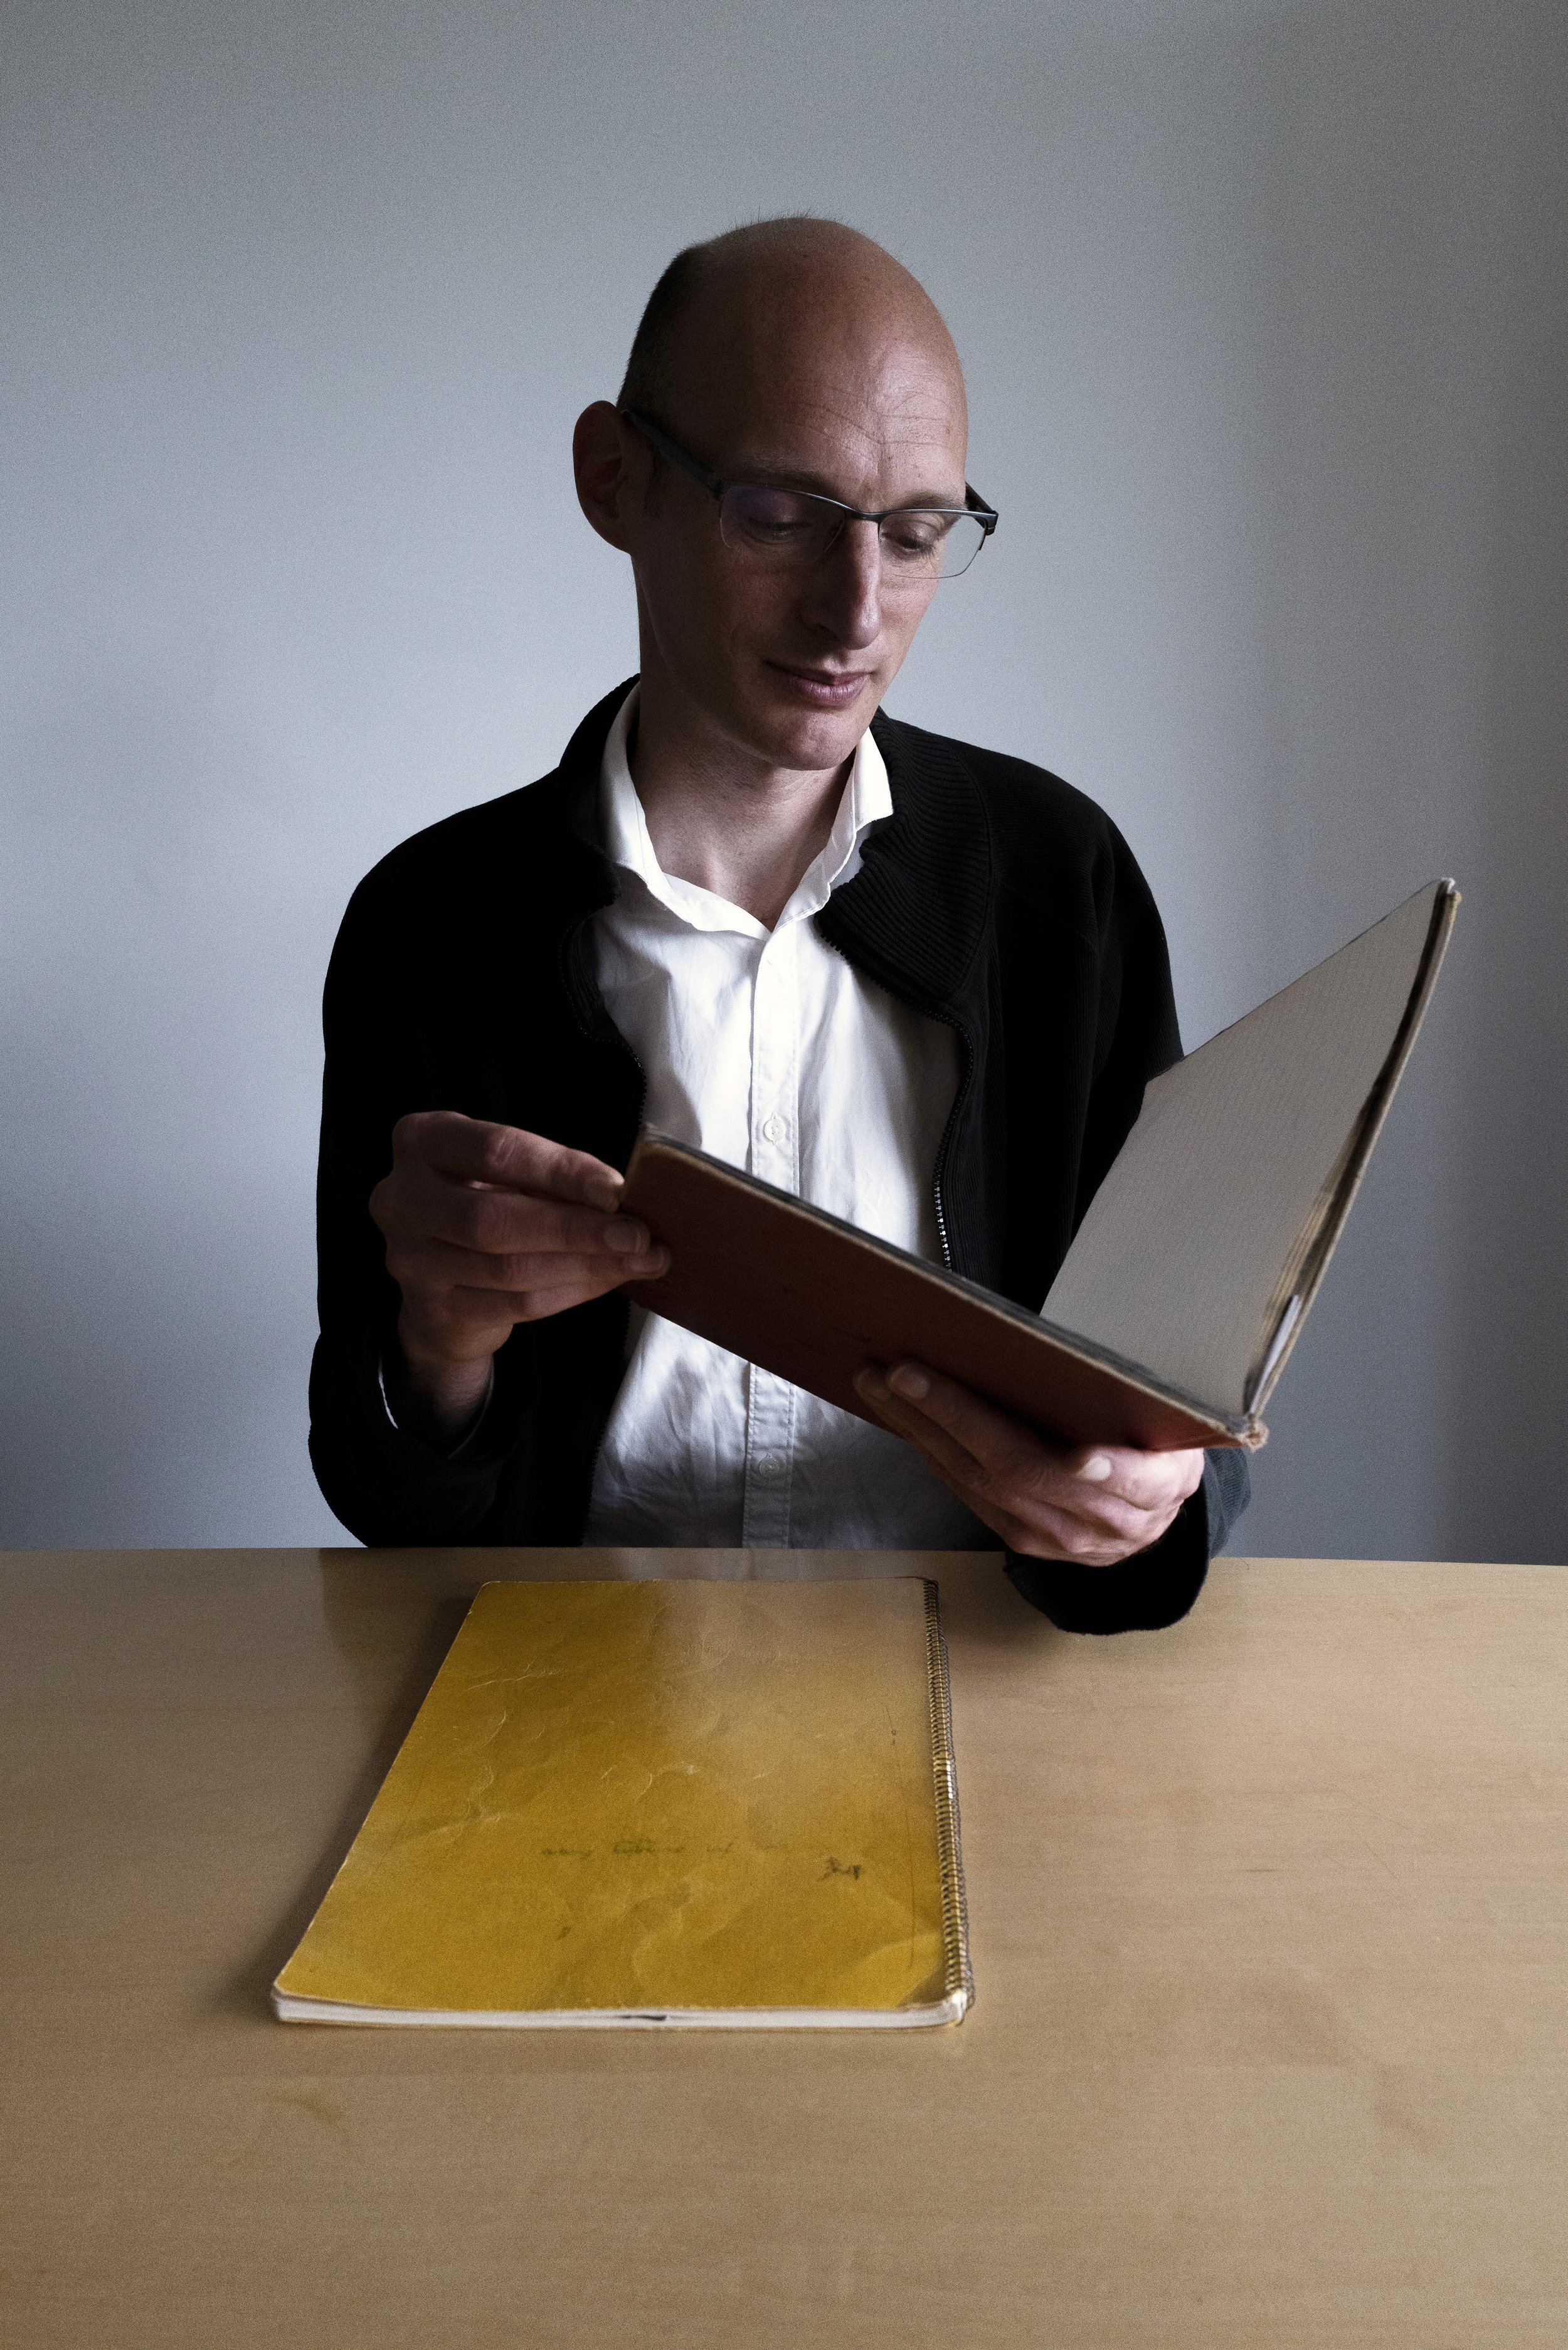   Dr Gabriel Heaton, a books and manuscripts specialist at Sotheby’s. with the late Freddie Mercury’s notebooks.   